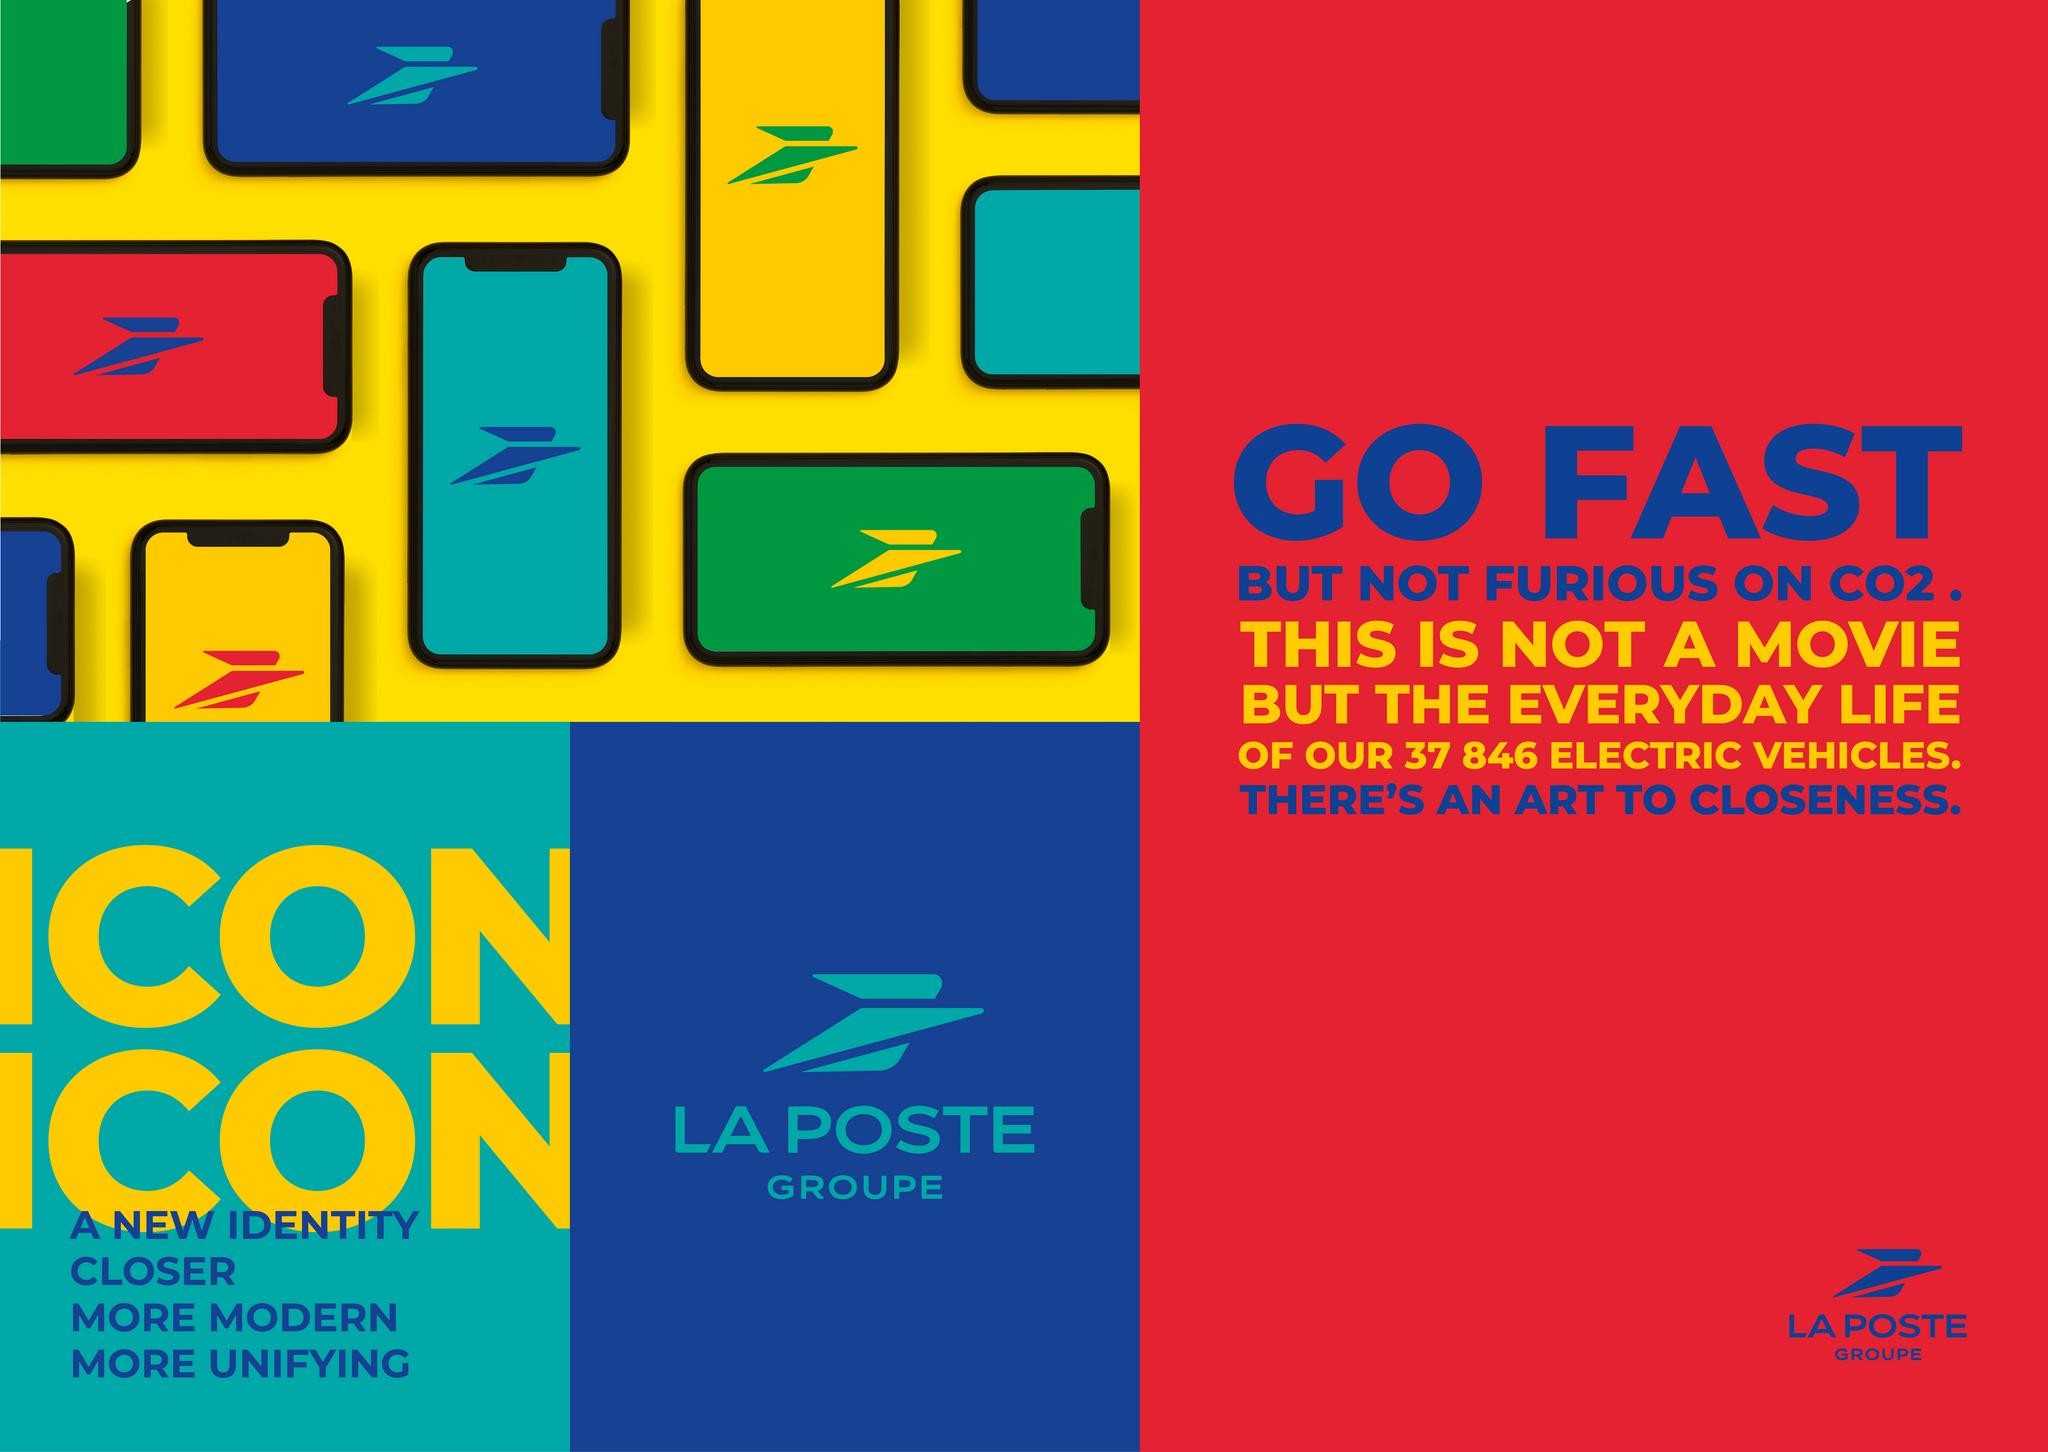 LA POSTE GROUP REVEALS ITS TRANSFORMATION WITH A NEW VISUAL IDENTITY.